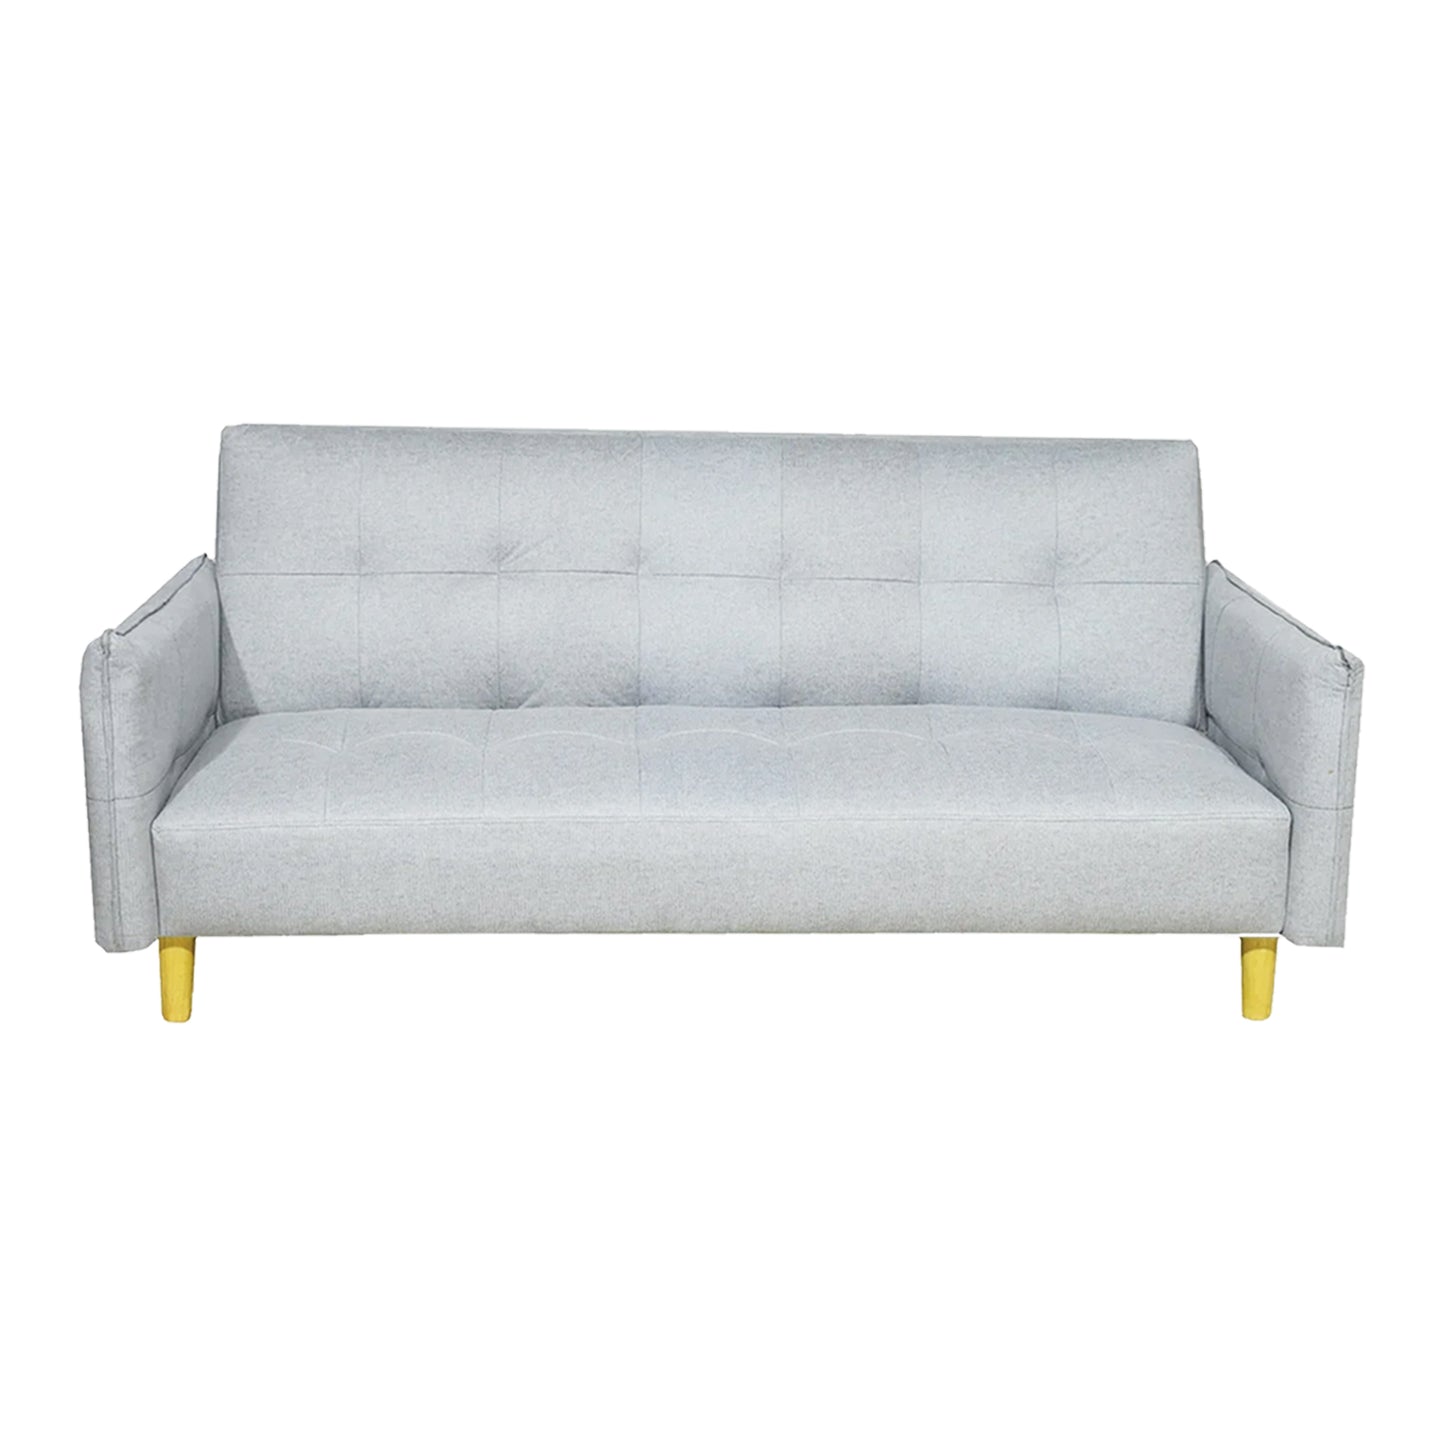 Miami Sleeper Couch Grey